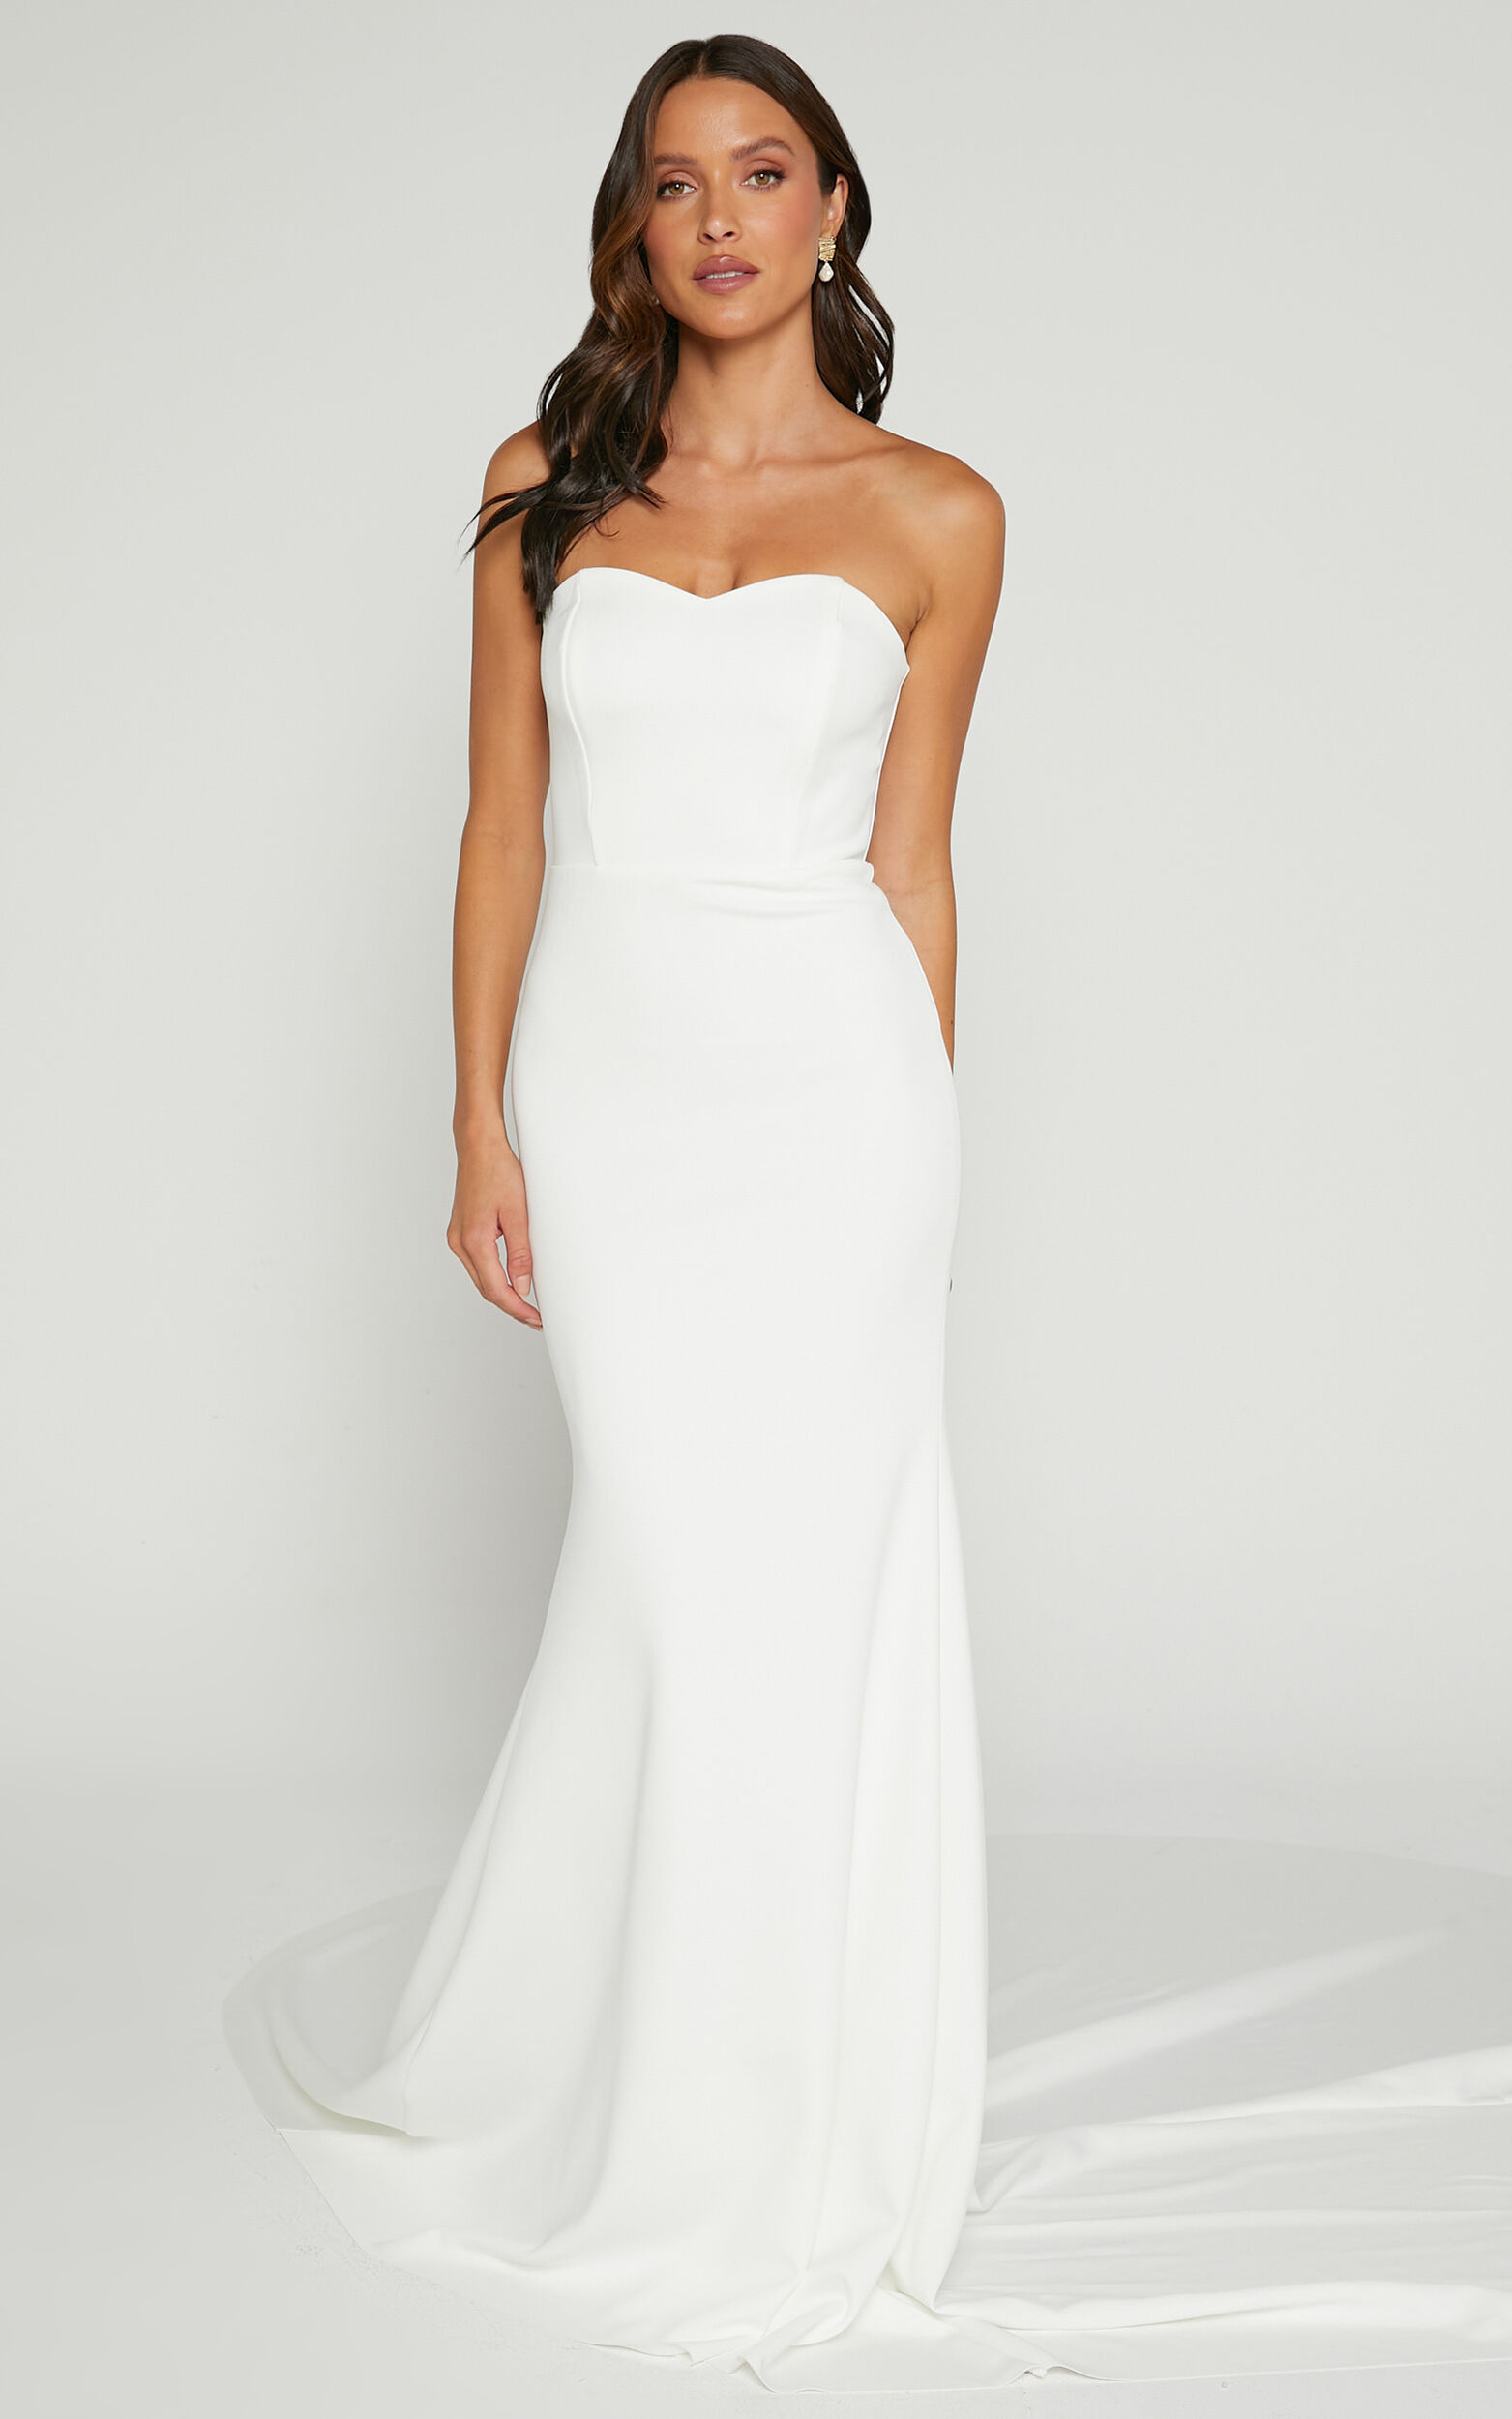 Vows For Life Bridal Gown - Strapless Mermaid Gown in White - 04, WHT1